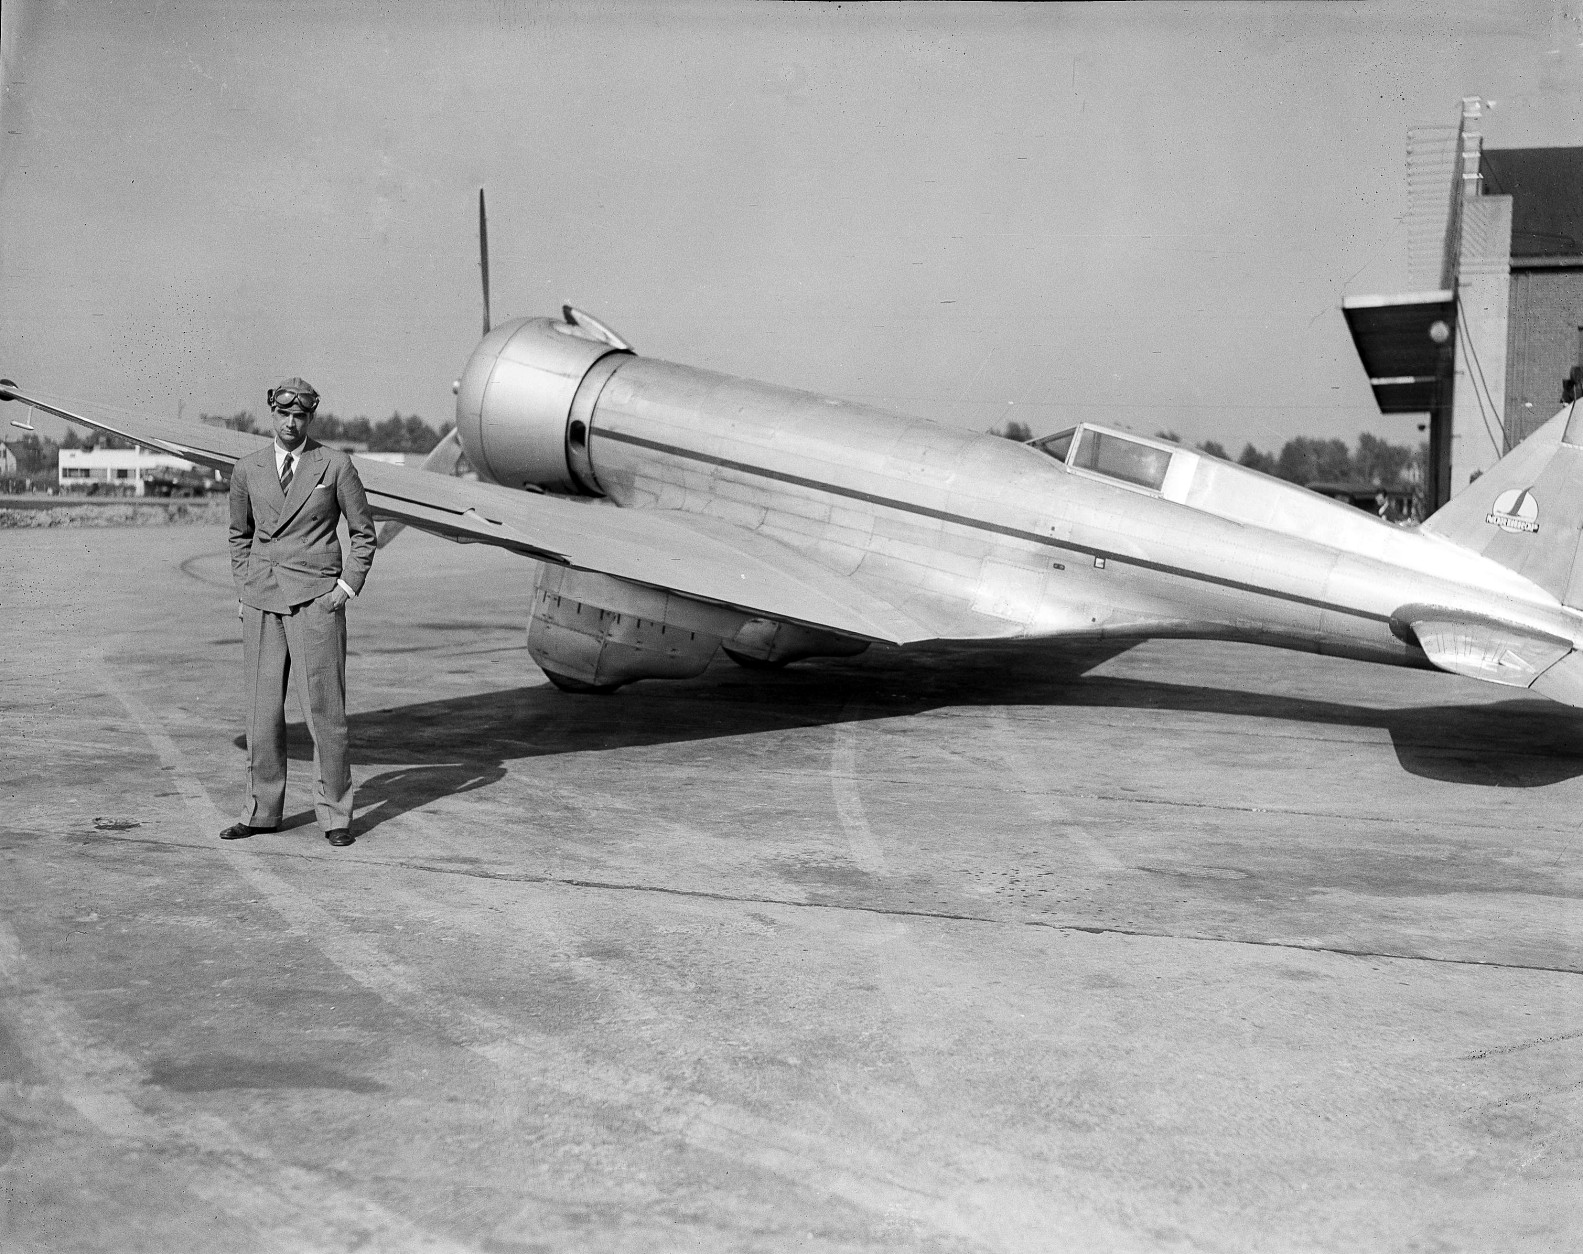 Millionaire sportsman, movie producer and holder of flight speed records Howard Hughes, poses by his air speedster shortly before roaring westward to Los Angeles, from Chicago, Ill., May 14, 1936, in an effort set a "lunch-to-dinner" air record. Inspired by a $50 bet, he had lunch in Chicago, then was off in an effort to reach Los Angeles in time for dinner. (AP Photo)